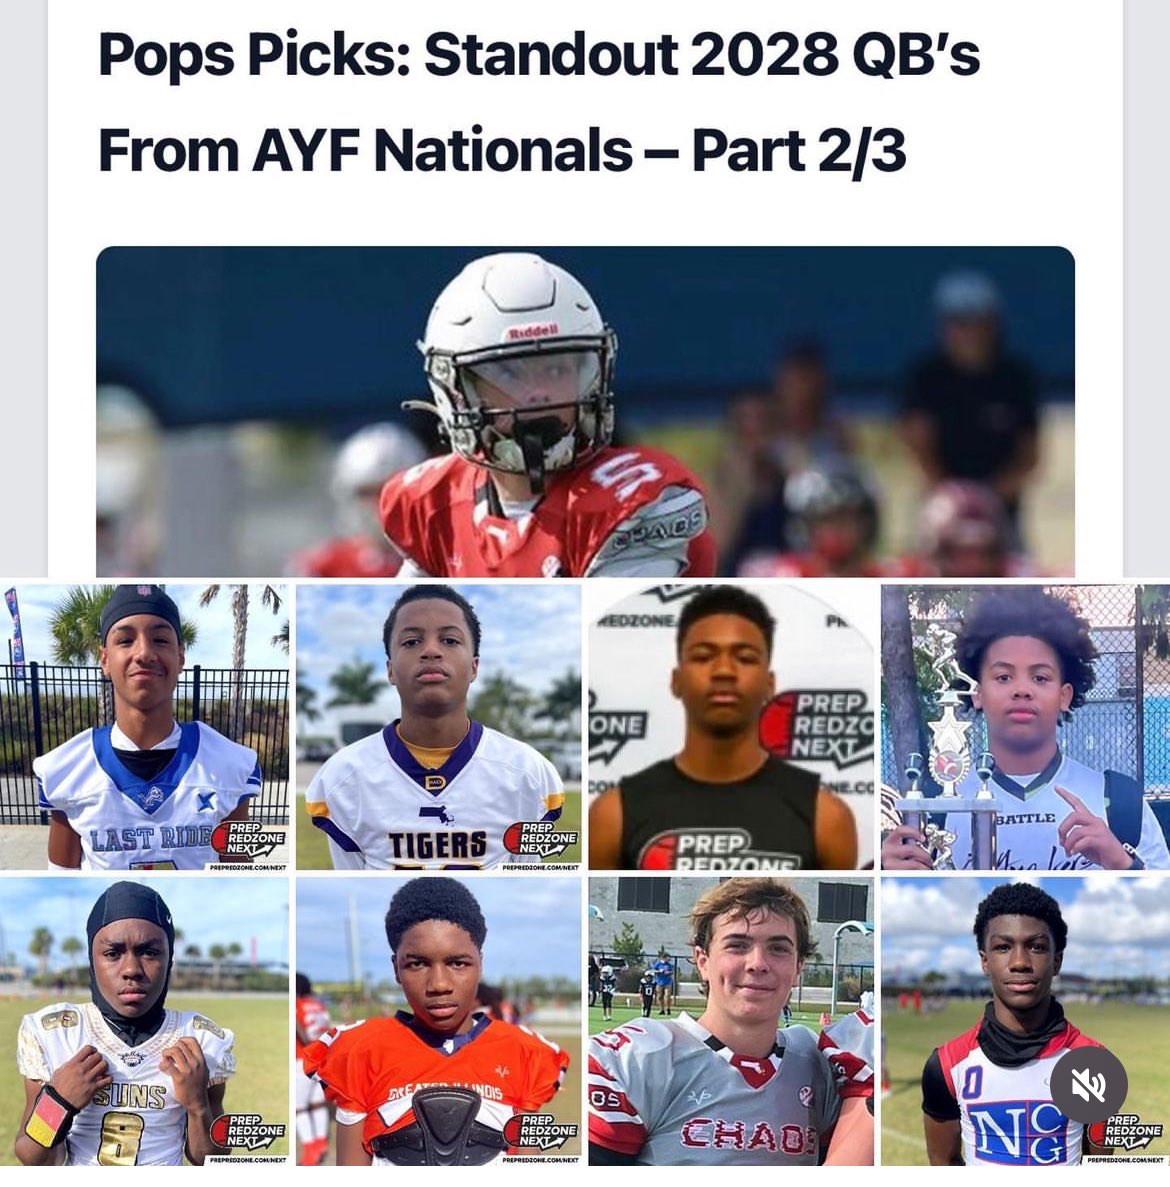 Thank you @AlPopsFootball for recognizing the talent on our team. Proud to be part of it. @PRZ_CoachSilva @PrepRedzoneNext @M2_QBacademy @CoachMartinESA @WRHS_Football @QBHitList